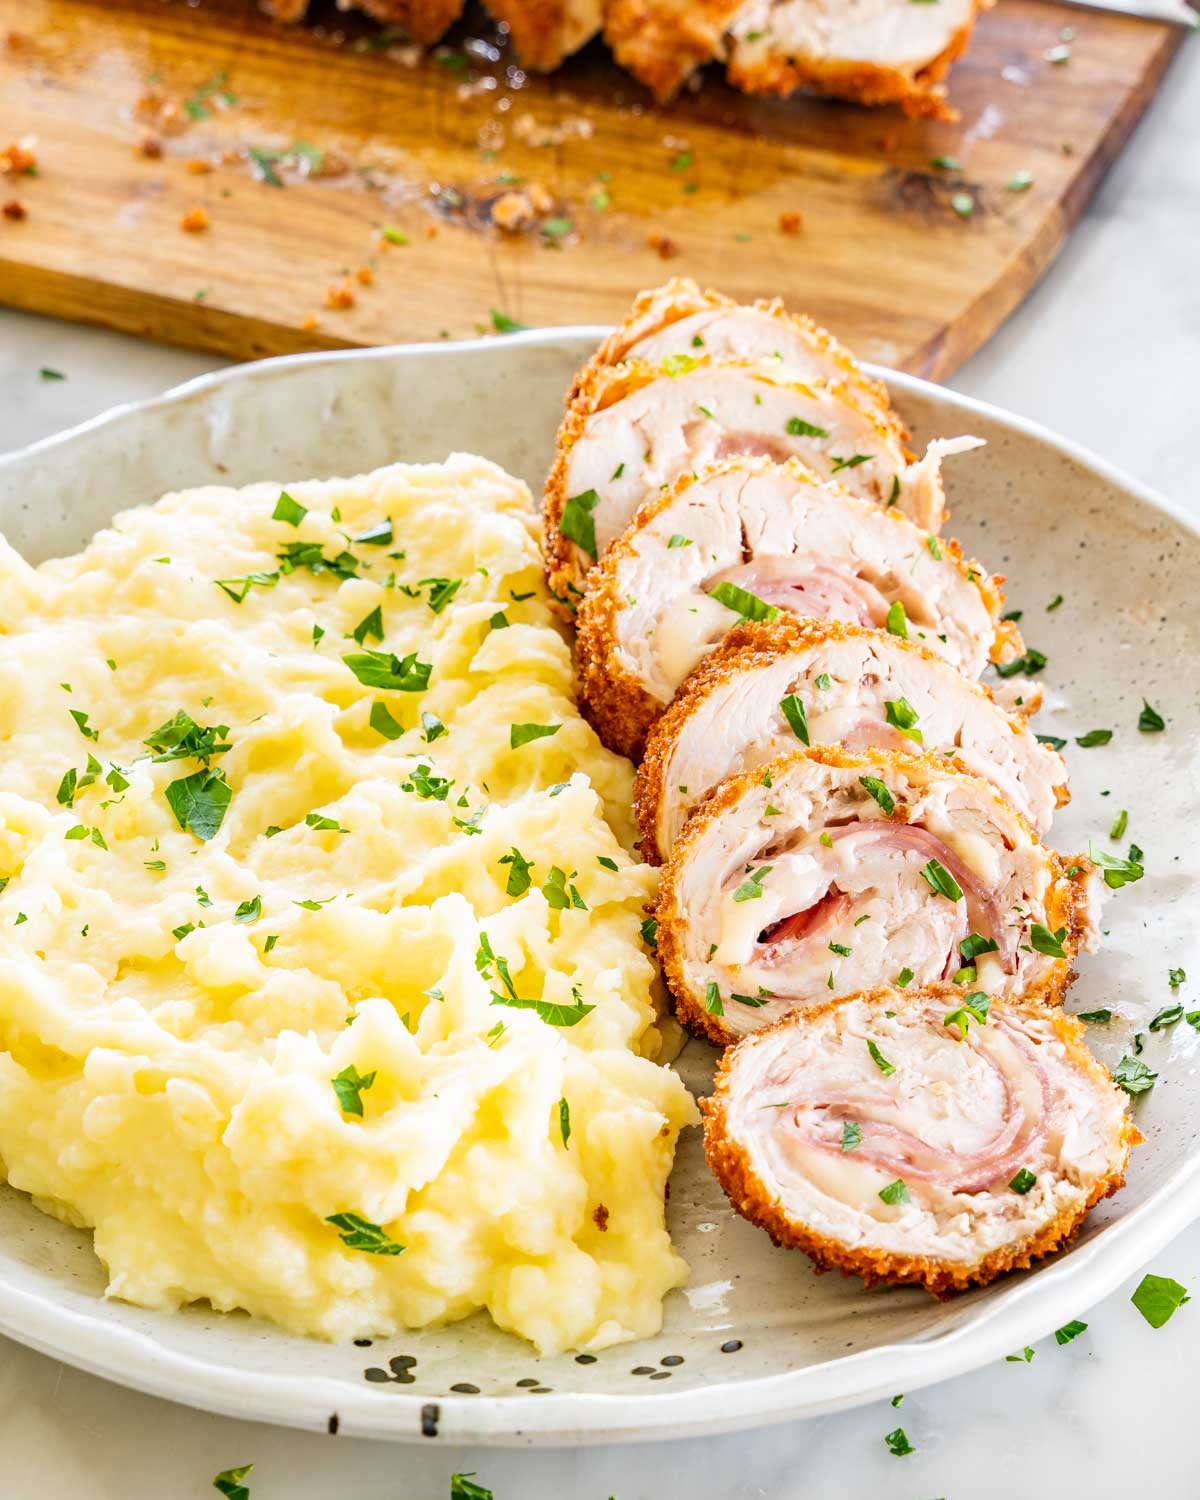 side view shot of chicken cordon bleu next to a side of mashed potatoes.